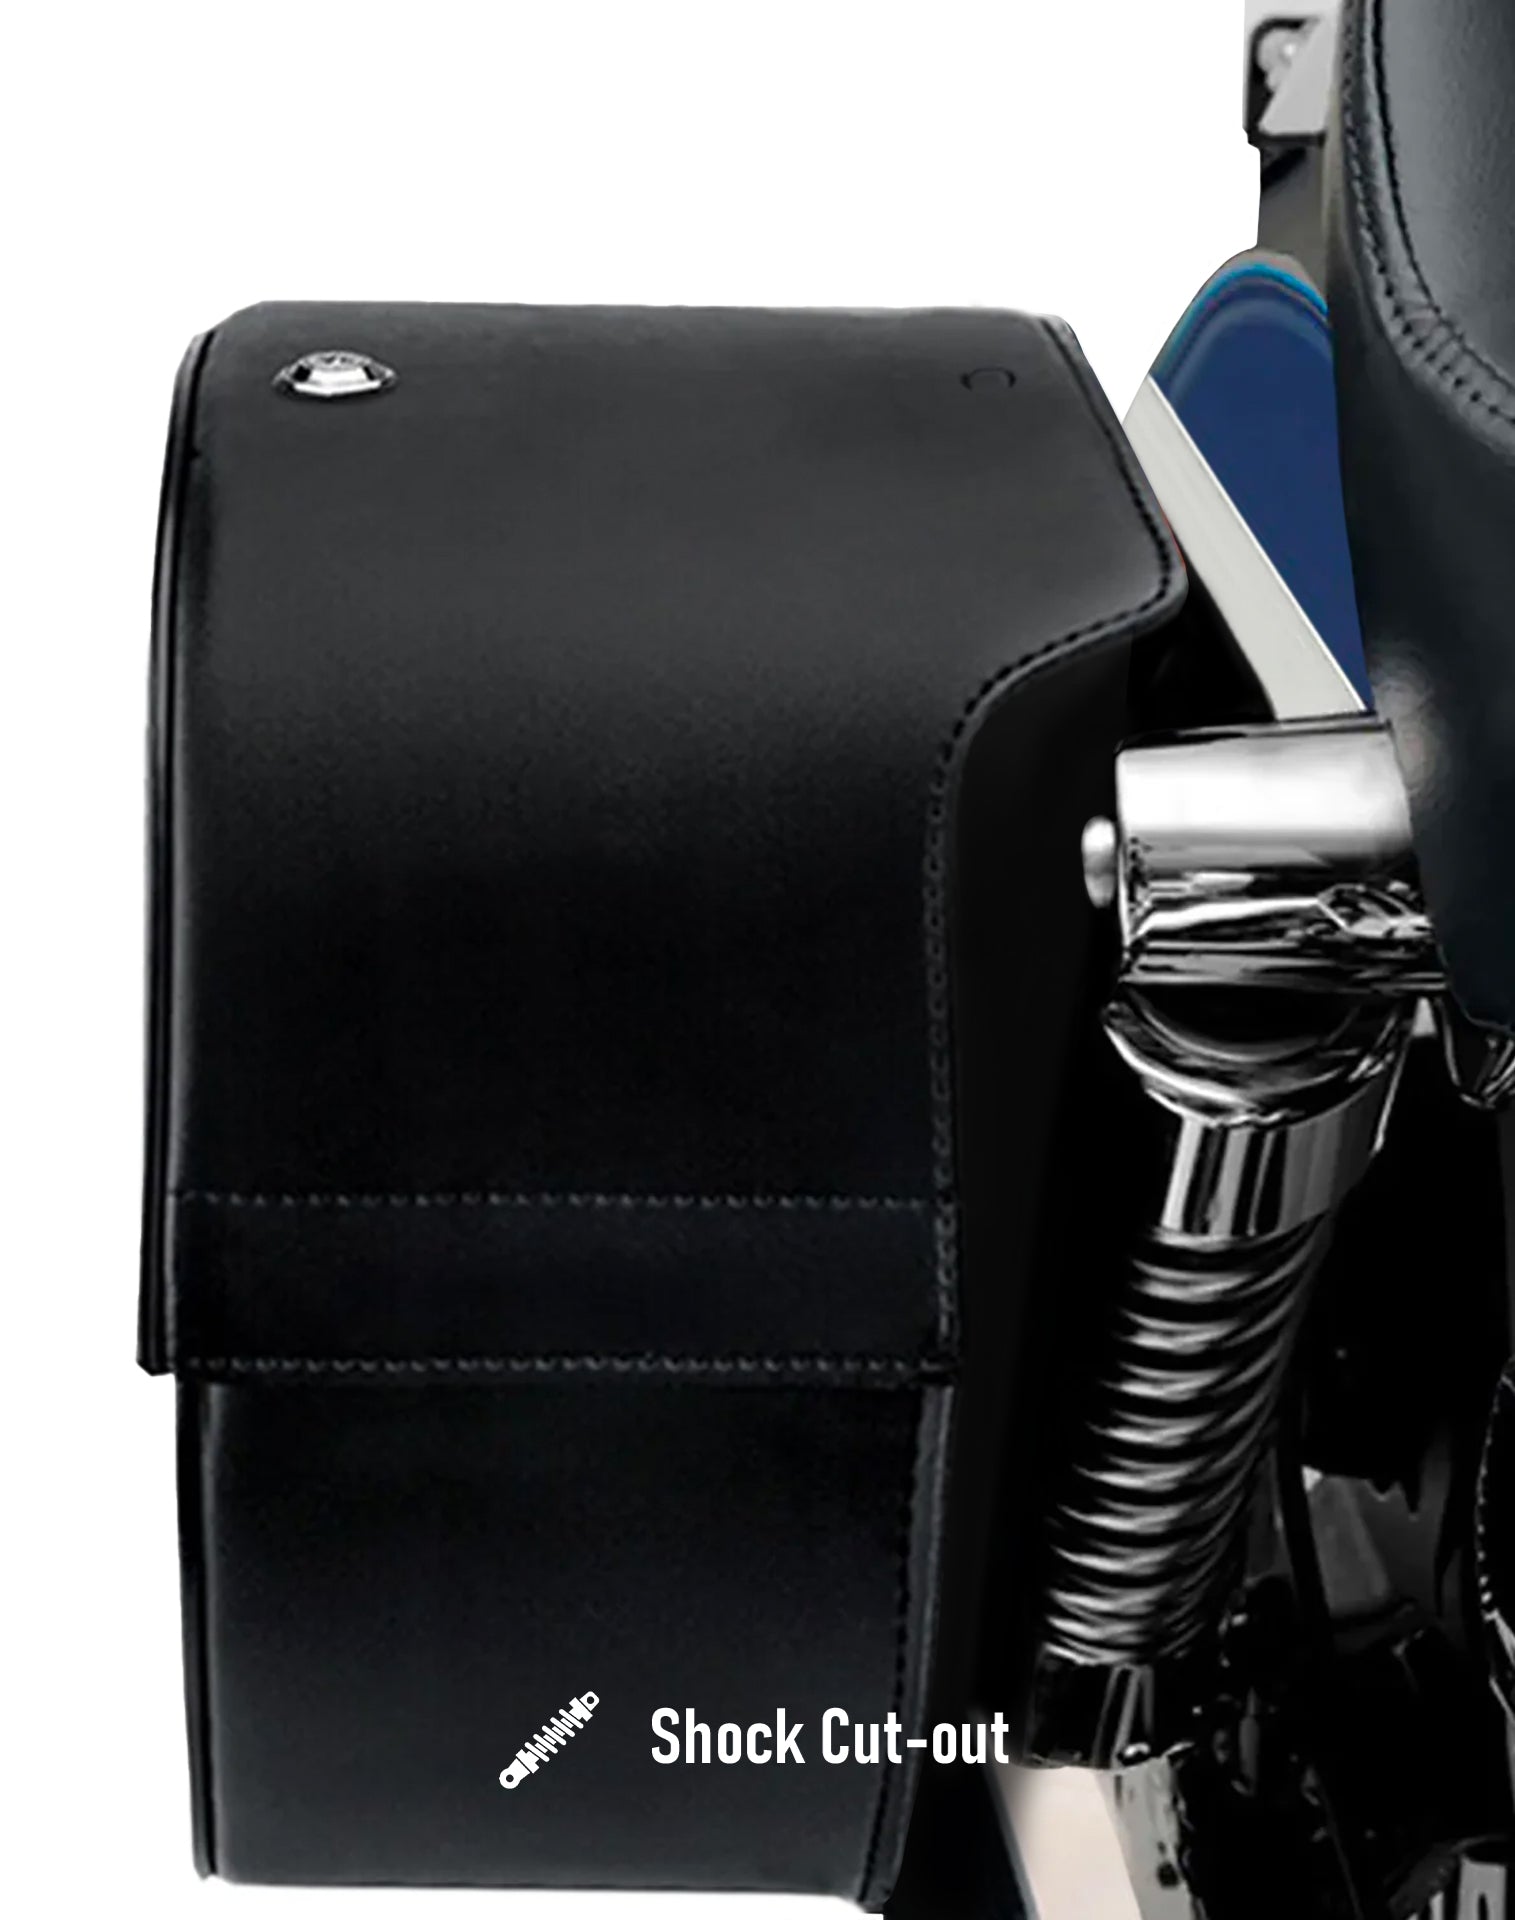 26L - Warrior Large Honda Rebel 250 Shock Cut-out Leather Motorcycle Saddlebags Hard Shell Construction